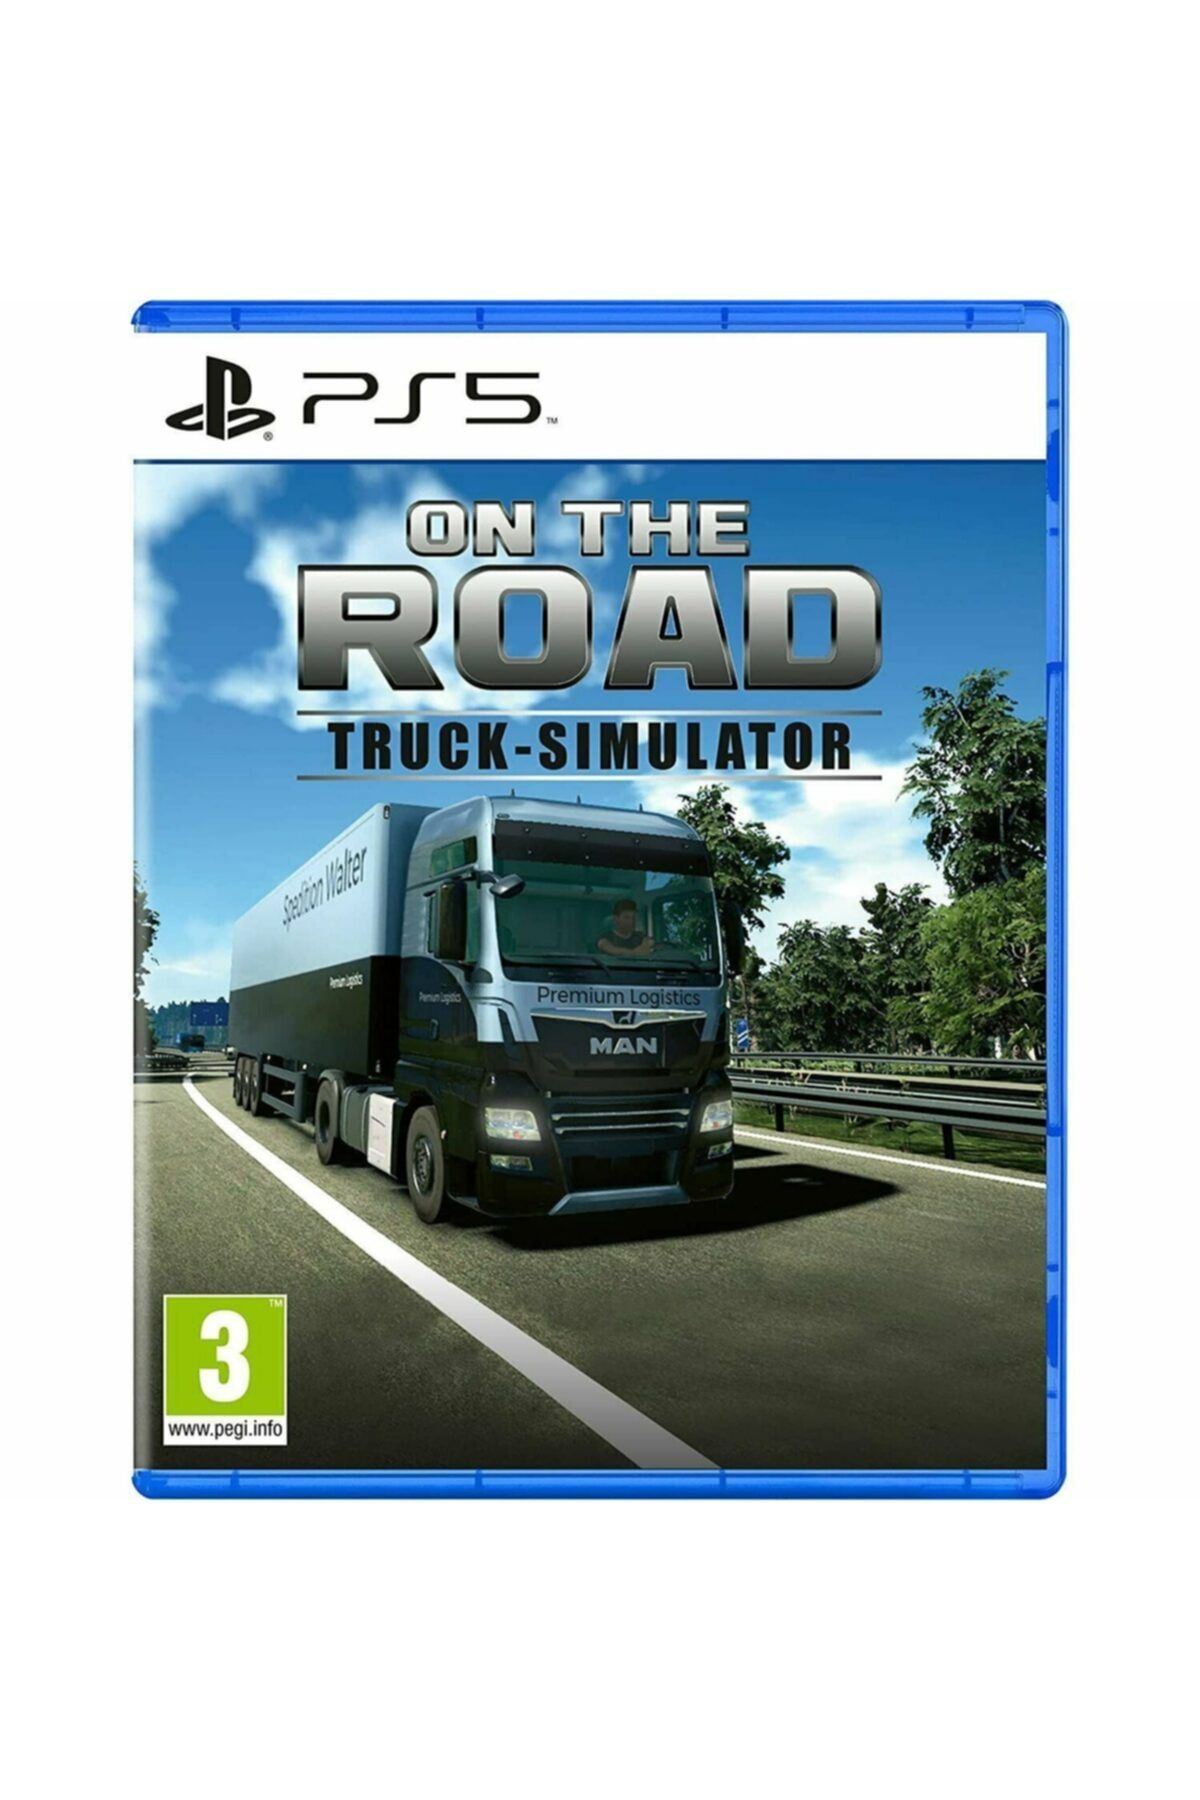 Aersoft On The Road Truck Simulator